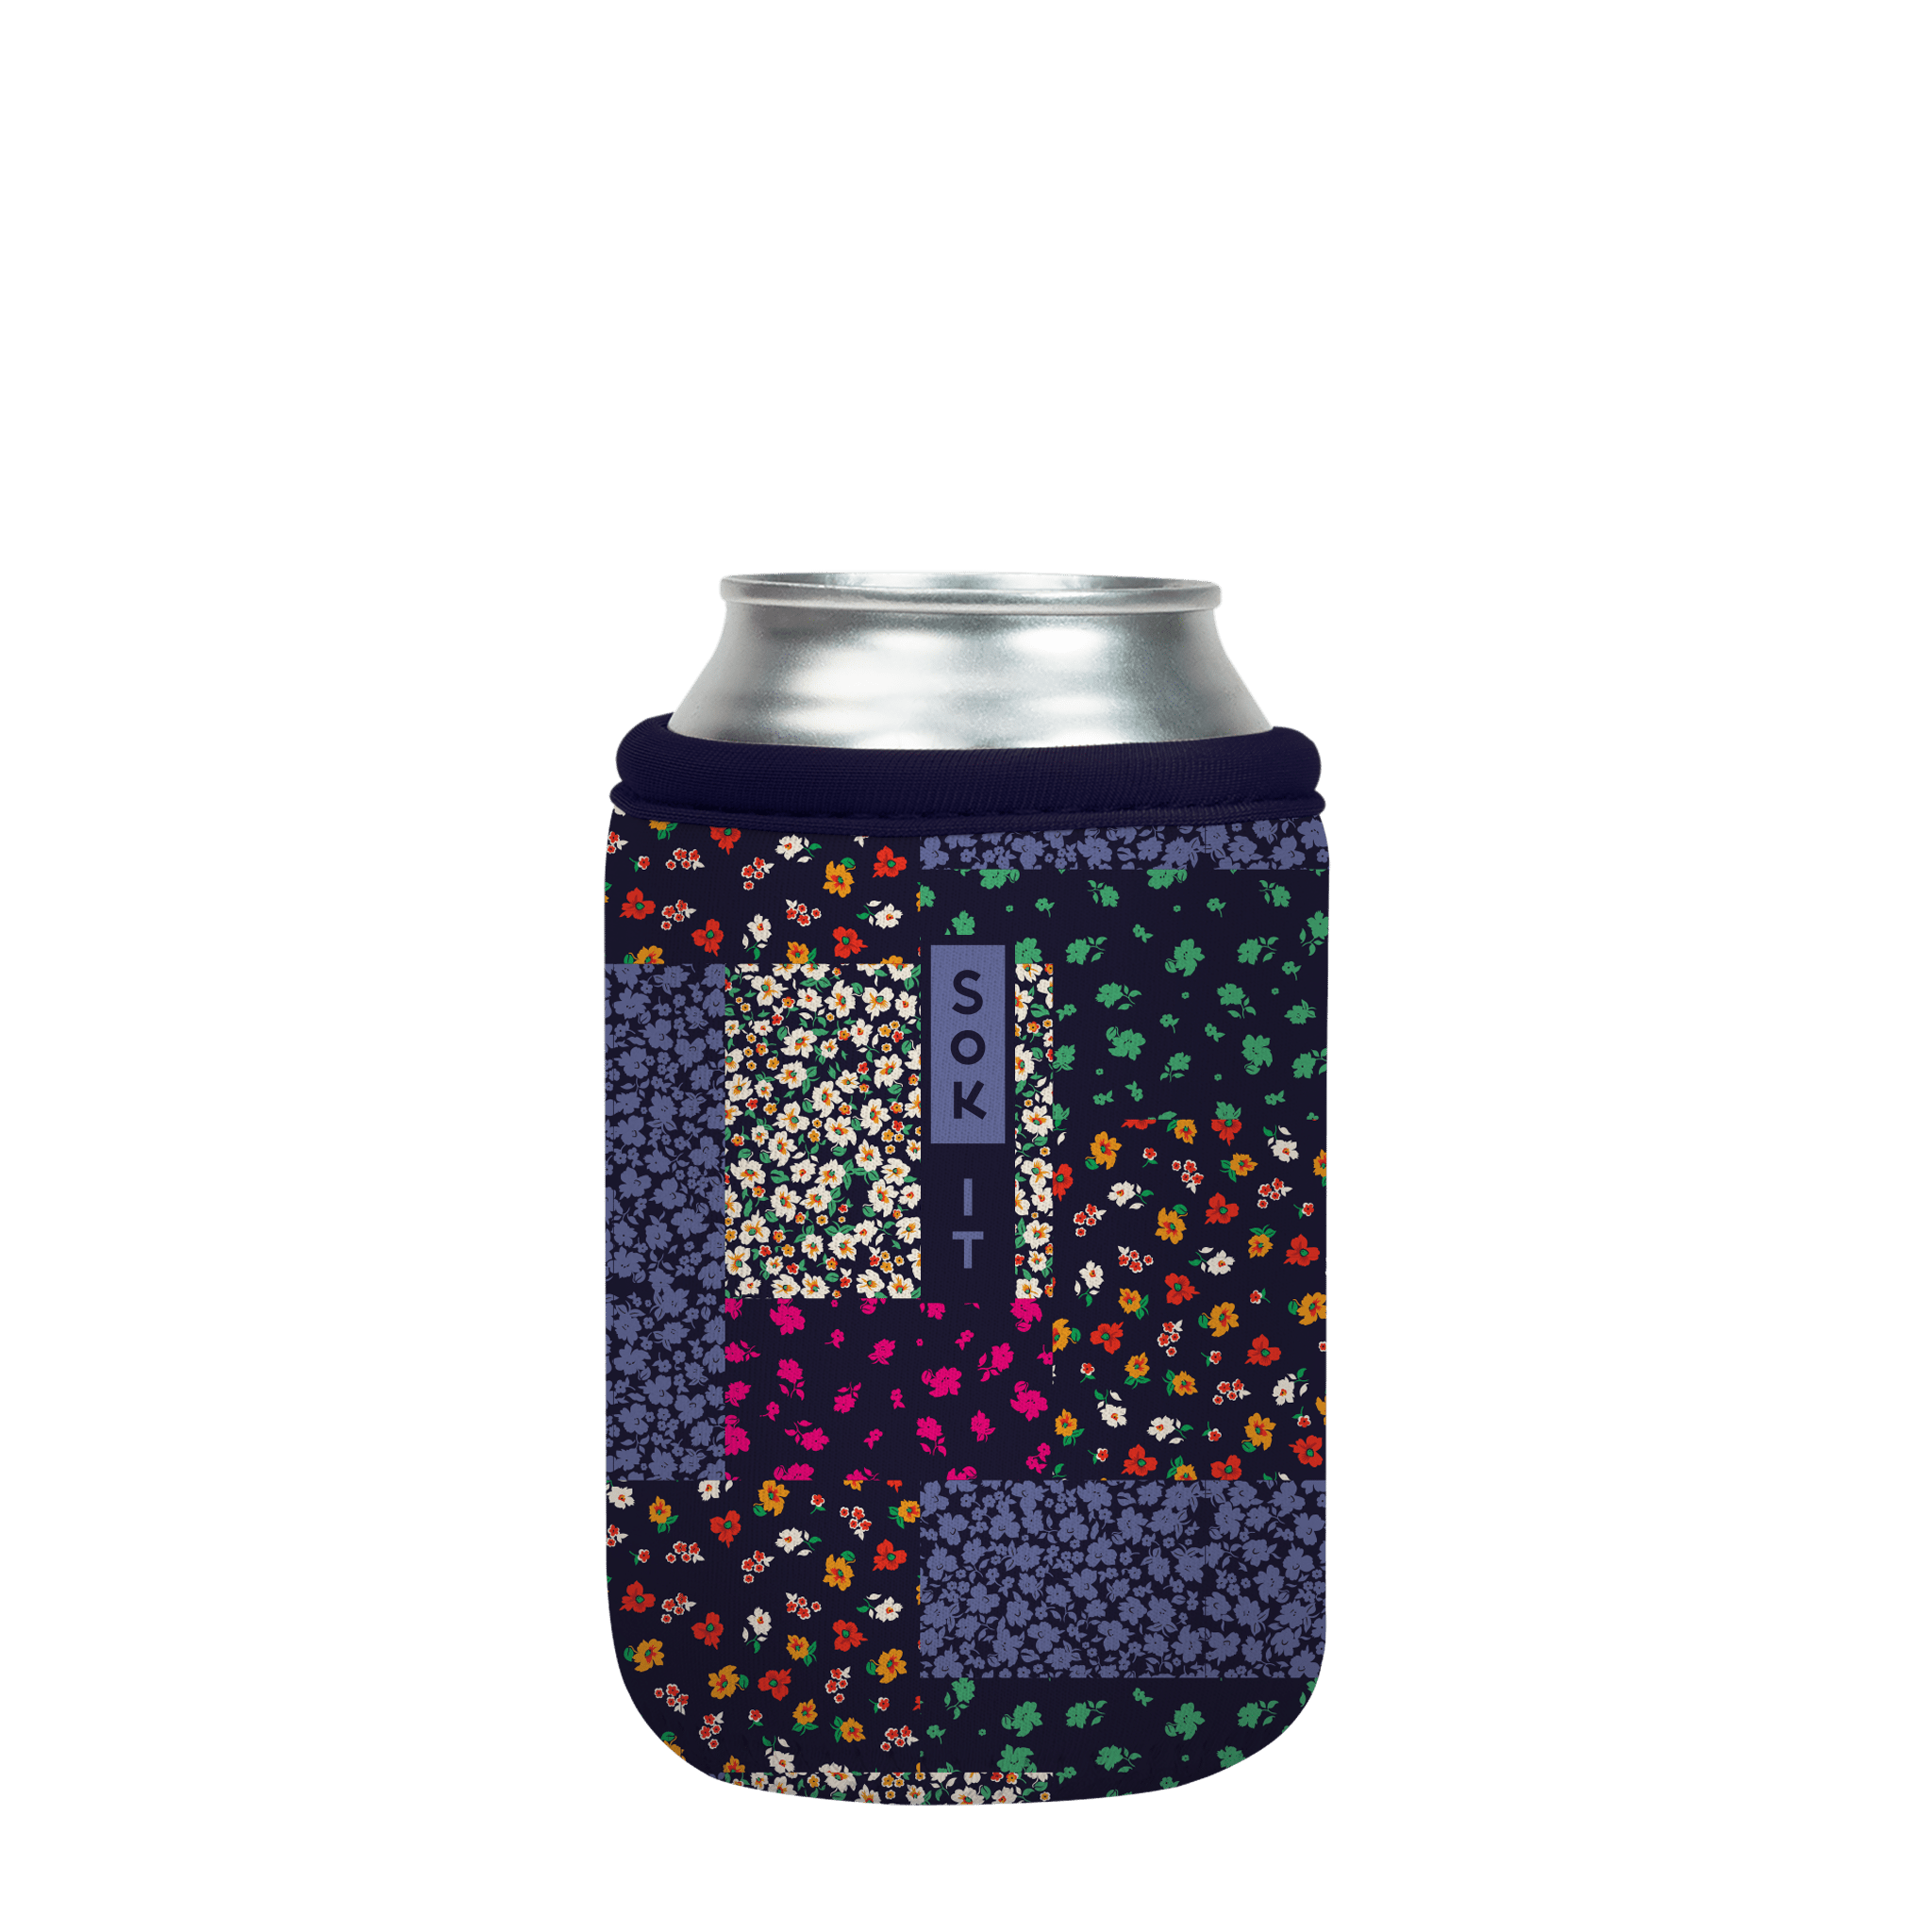 CanSok Flower Patch 12oz Can